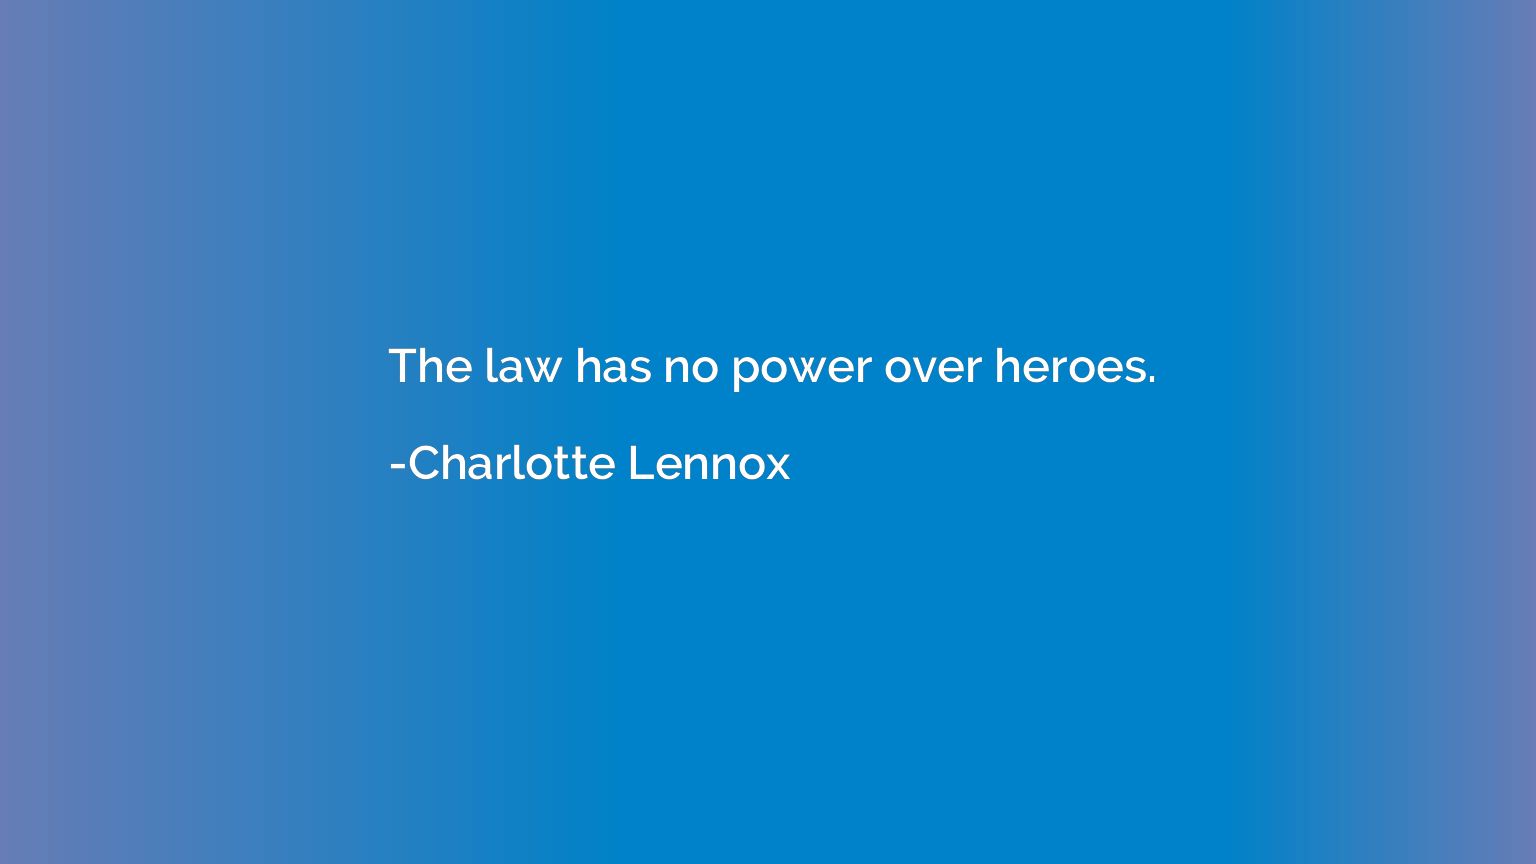 The law has no power over heroes.